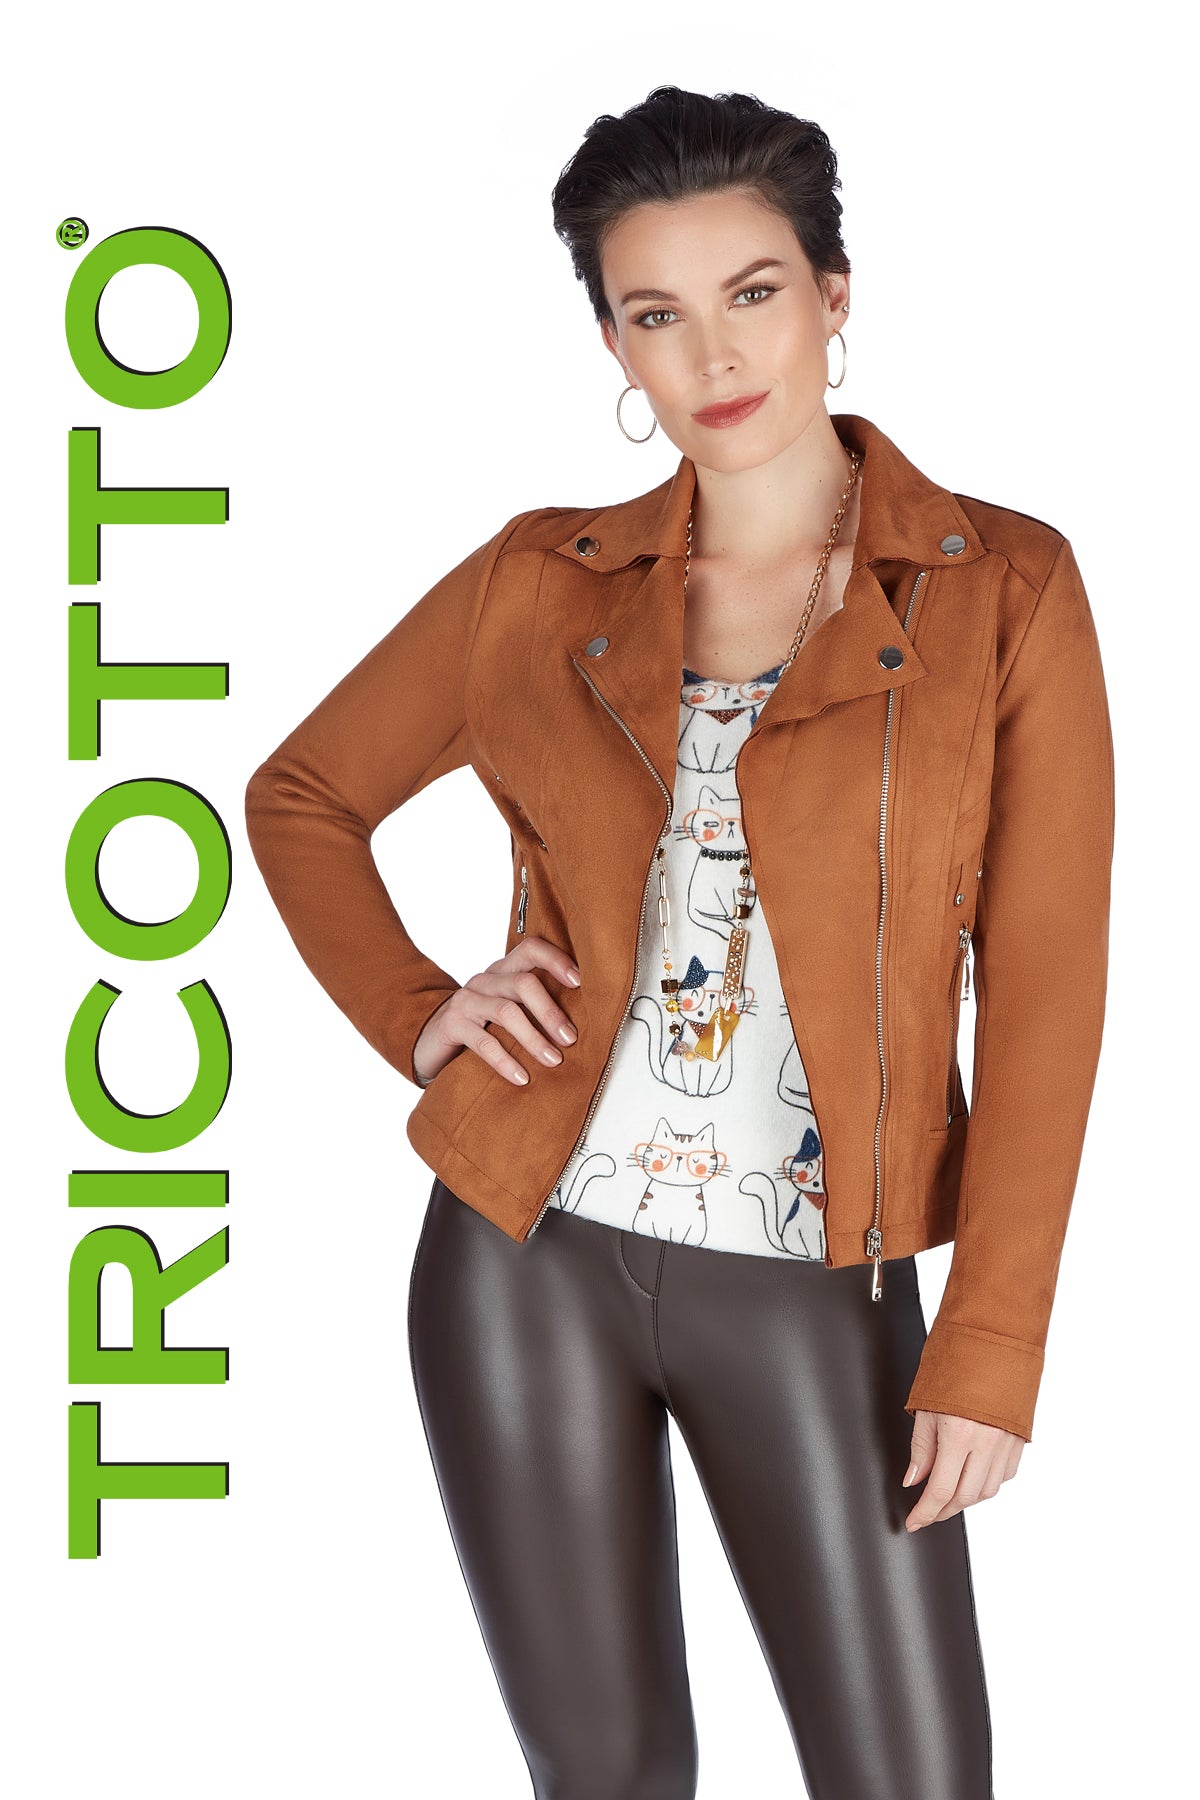 Tricotto Cognac Jacket-Buy Tricotto Jackets Online-Tricotto Fashion Quebec-Tricotto Online Shop